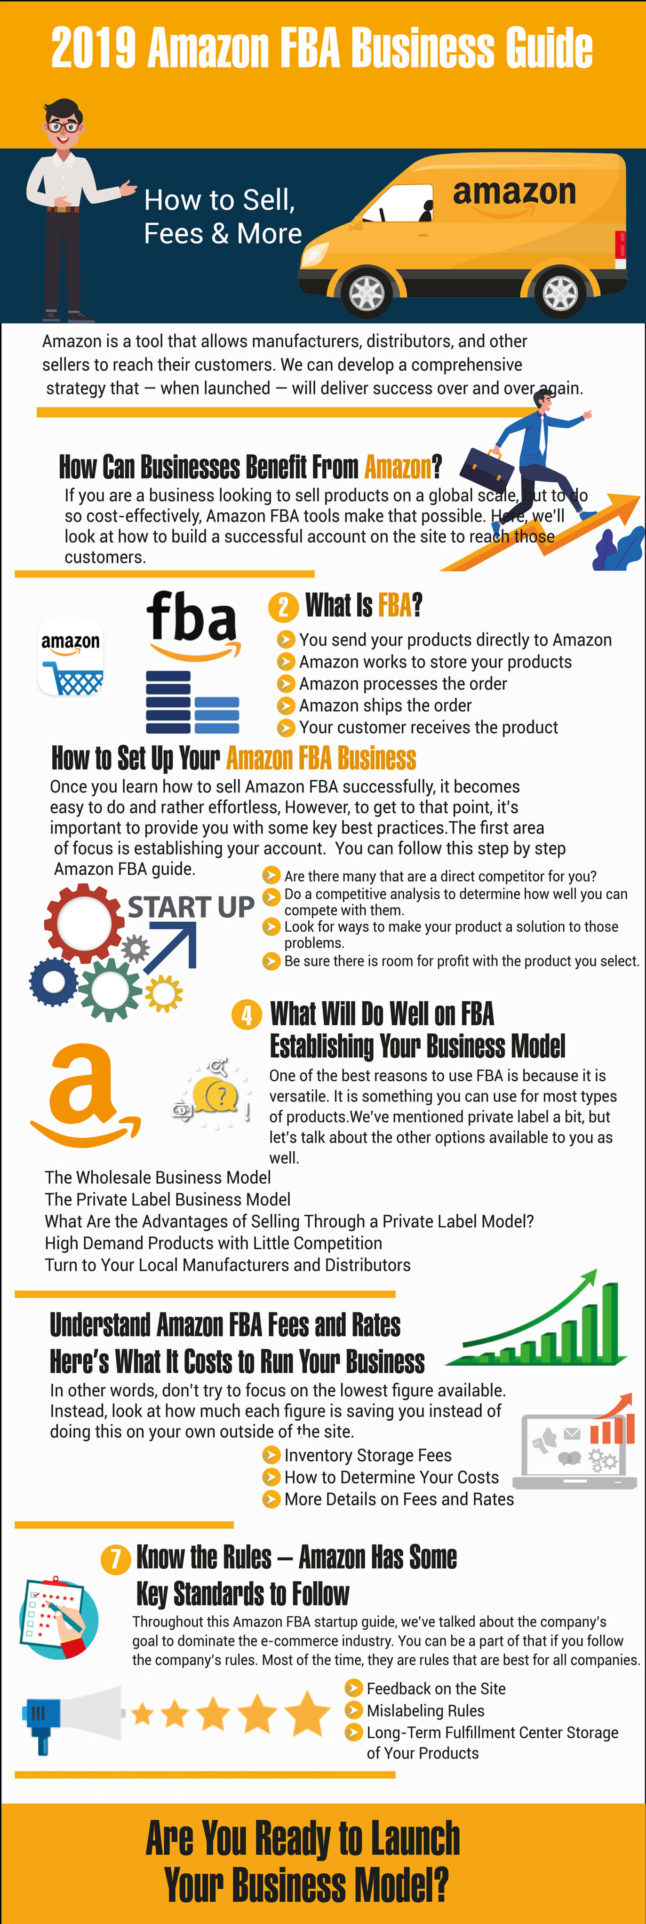 2019 Amazon FBA Business Guide: How to Sell, Fees & More